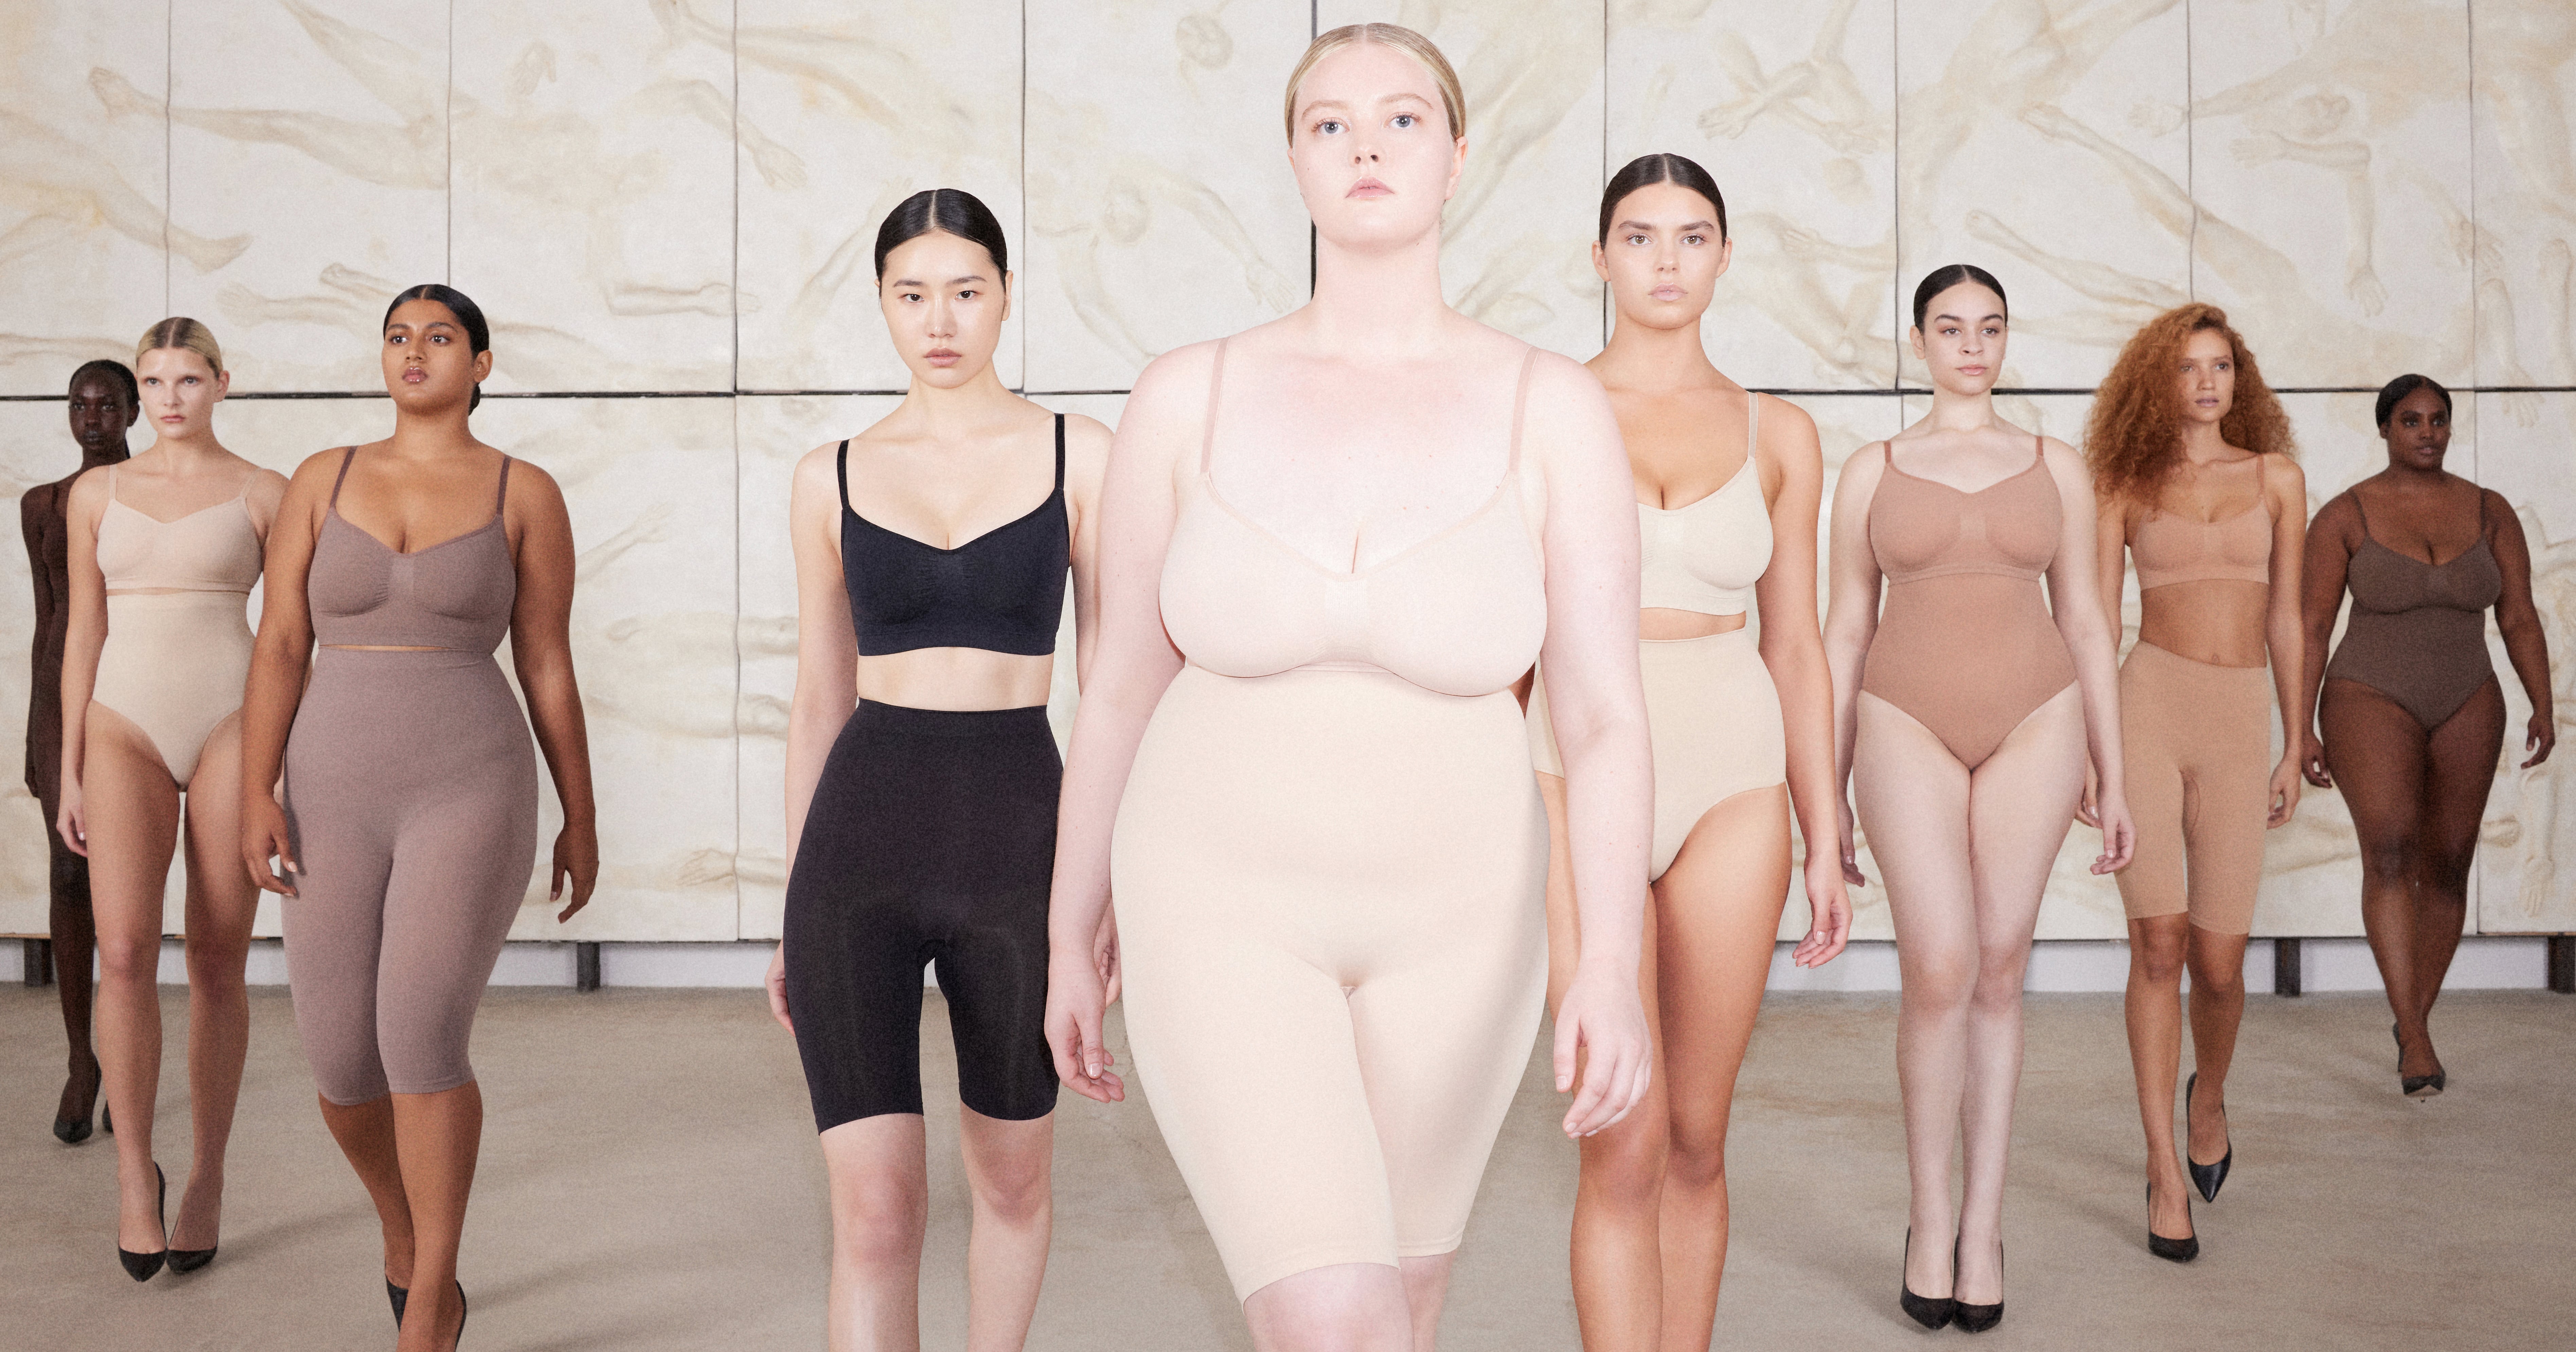 Spanx Debuts New Separate-and-Lift Bra  for Your Butt